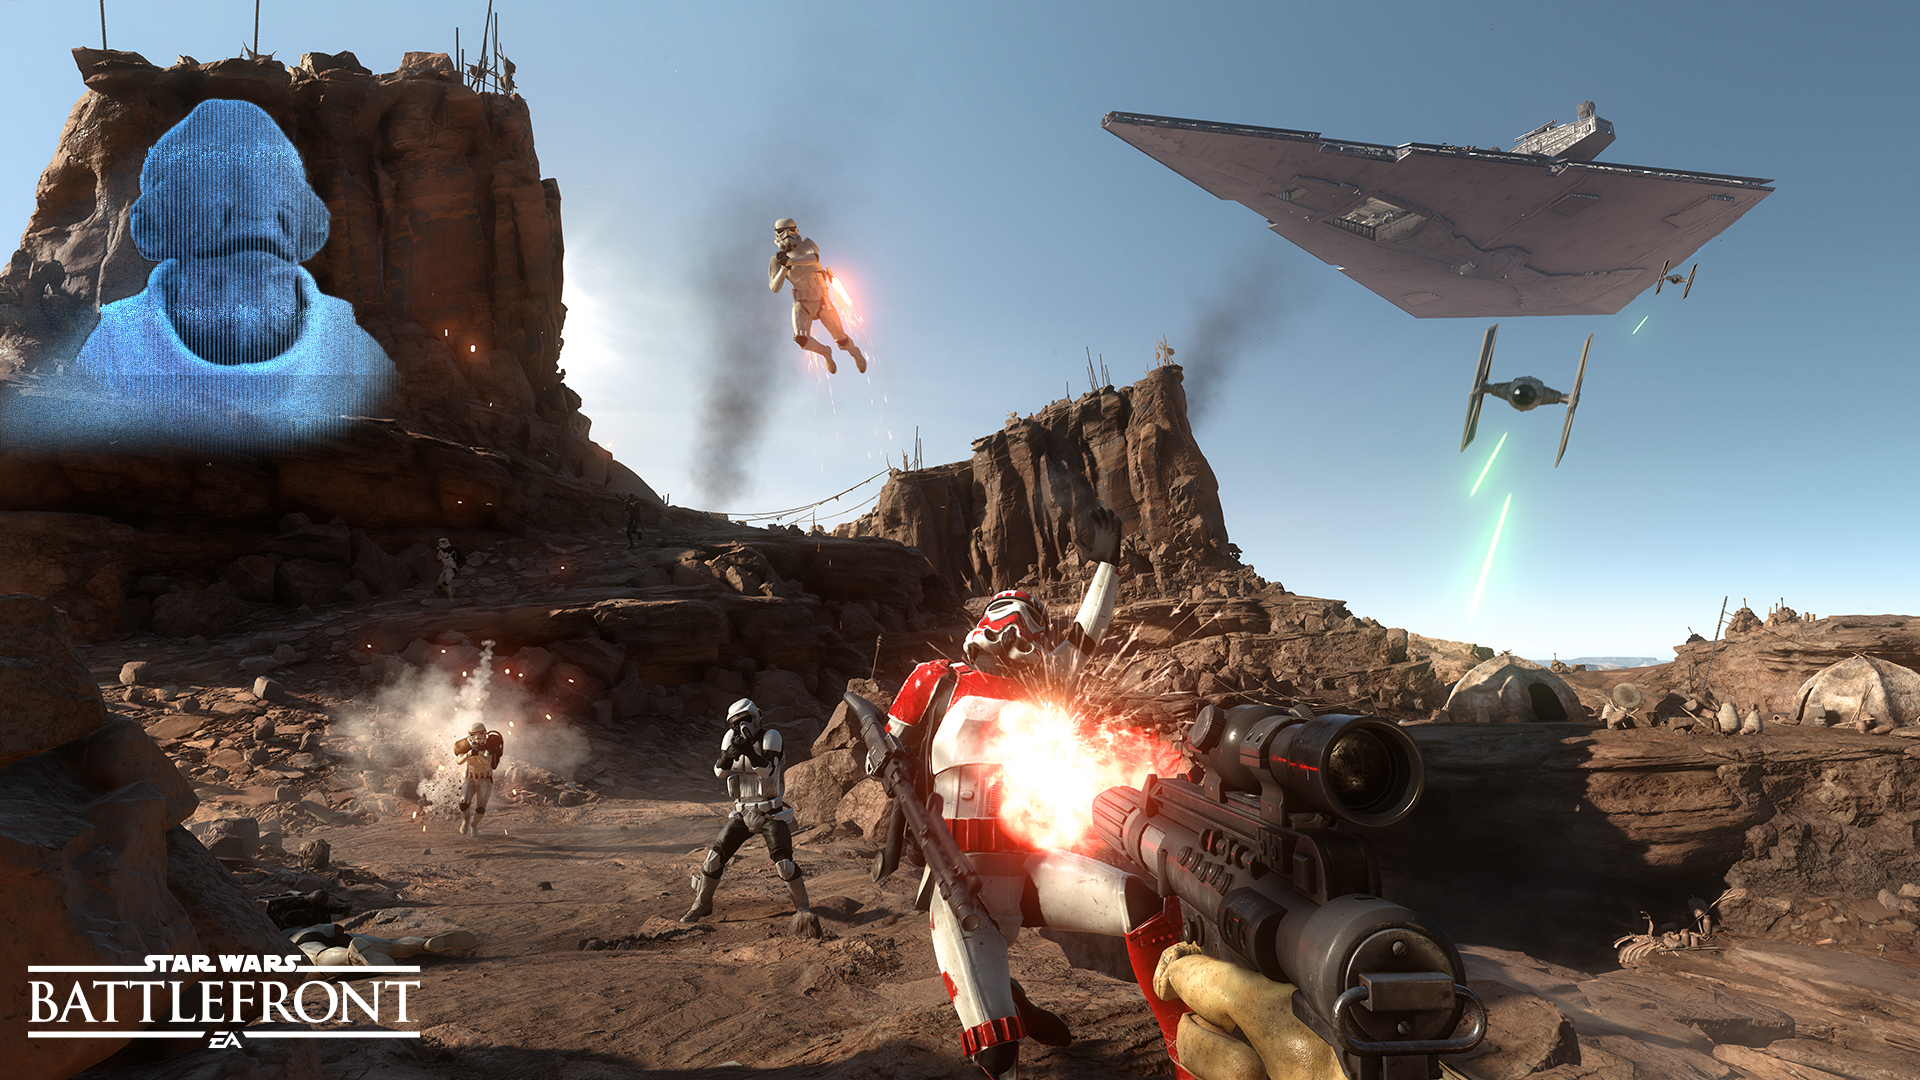 Star Wars: Battlefront's setting and world make for a great experience.